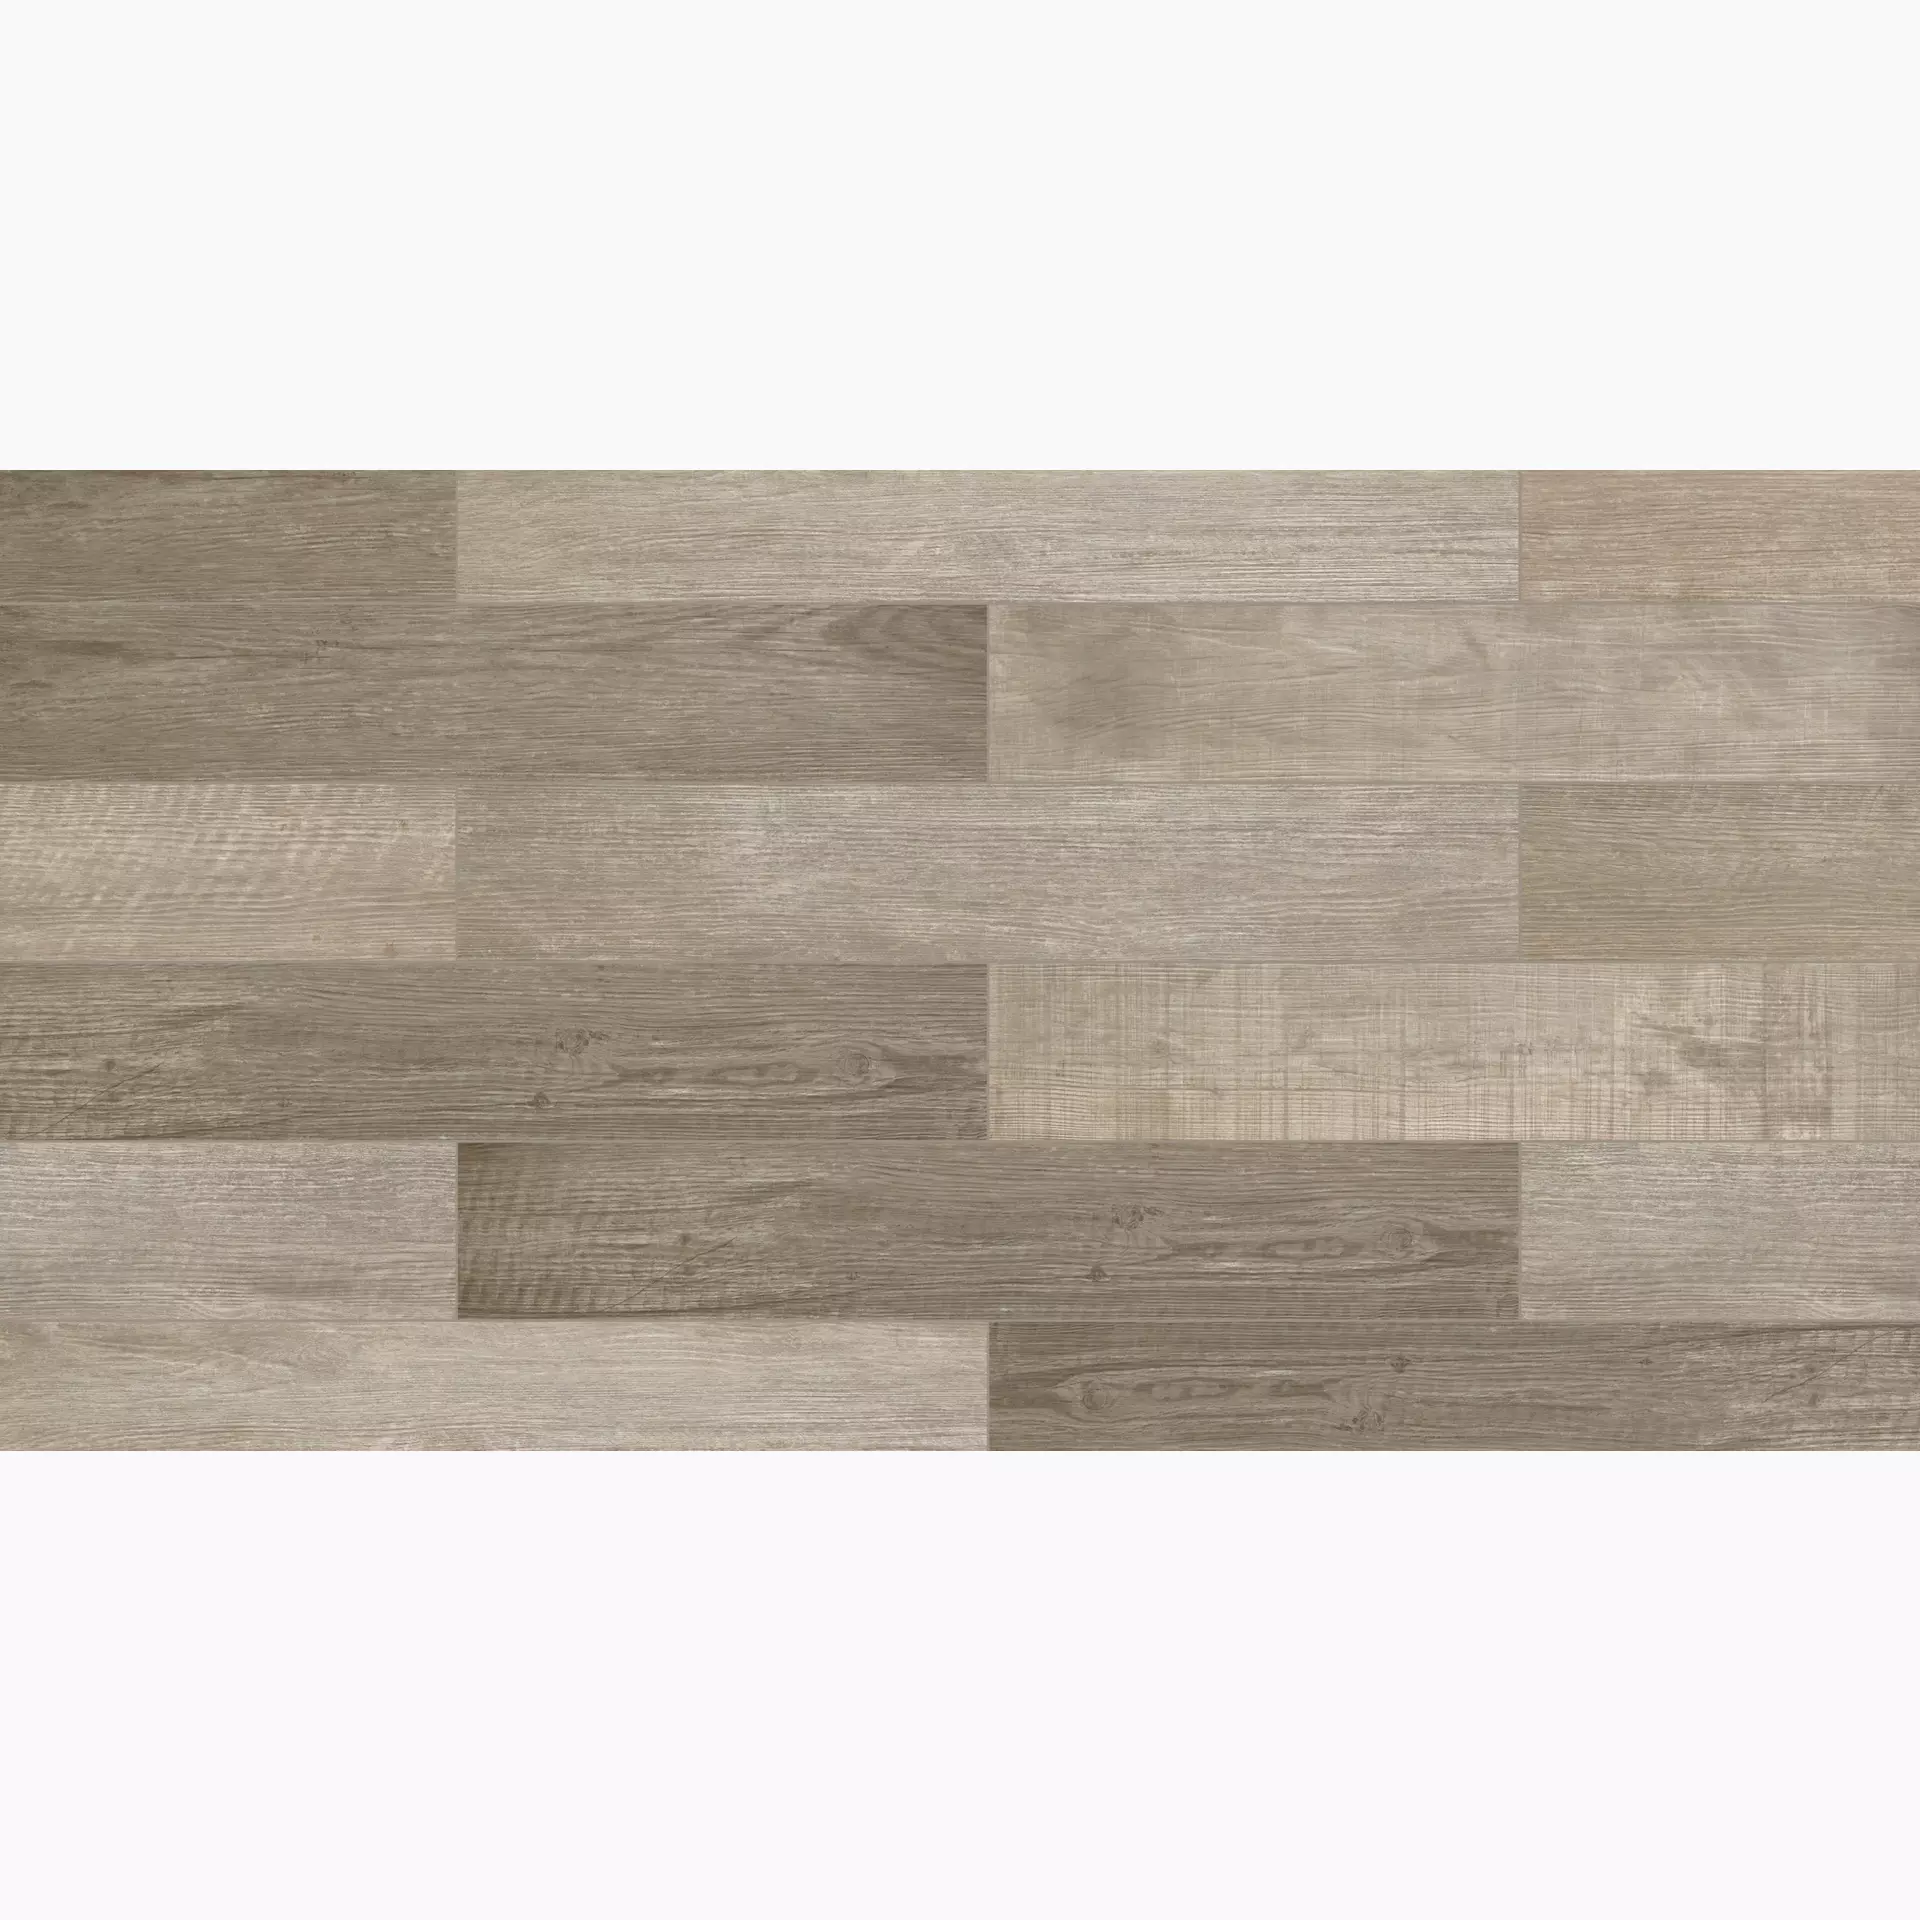 Serenissima Norway Mix Cold Naturale 1050643 20x120cm rectified 9,5mm